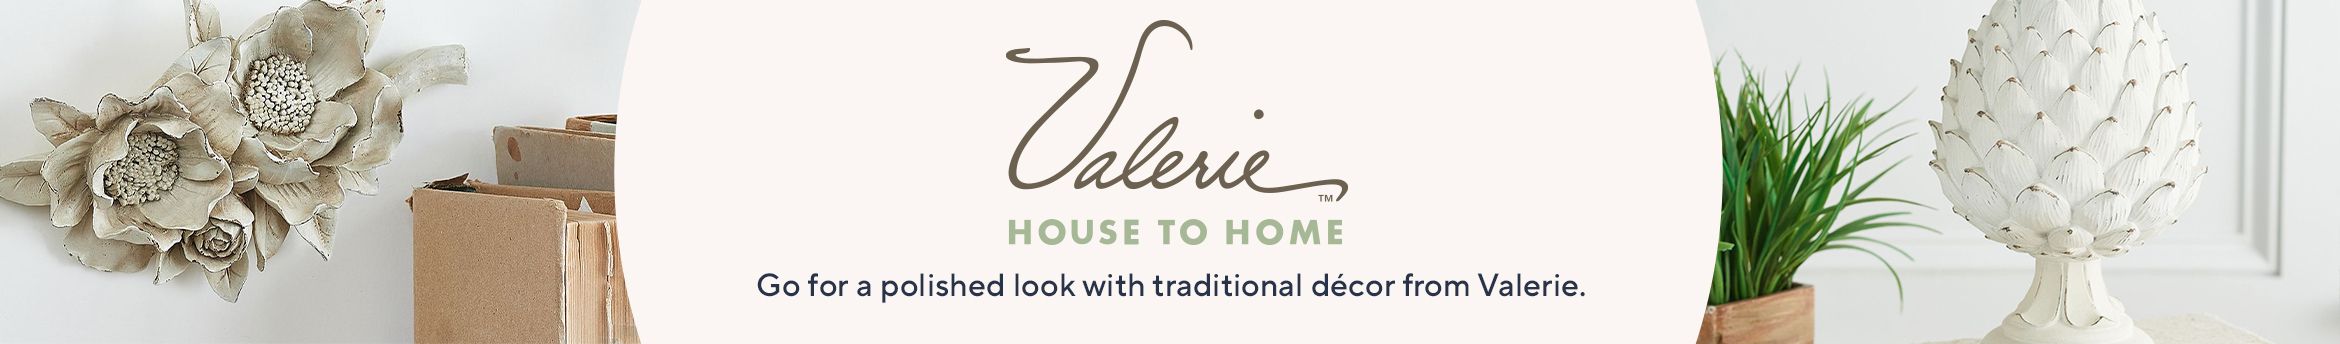 Valerie House to Home. Go for a polished look with traditional décor from Valerie.